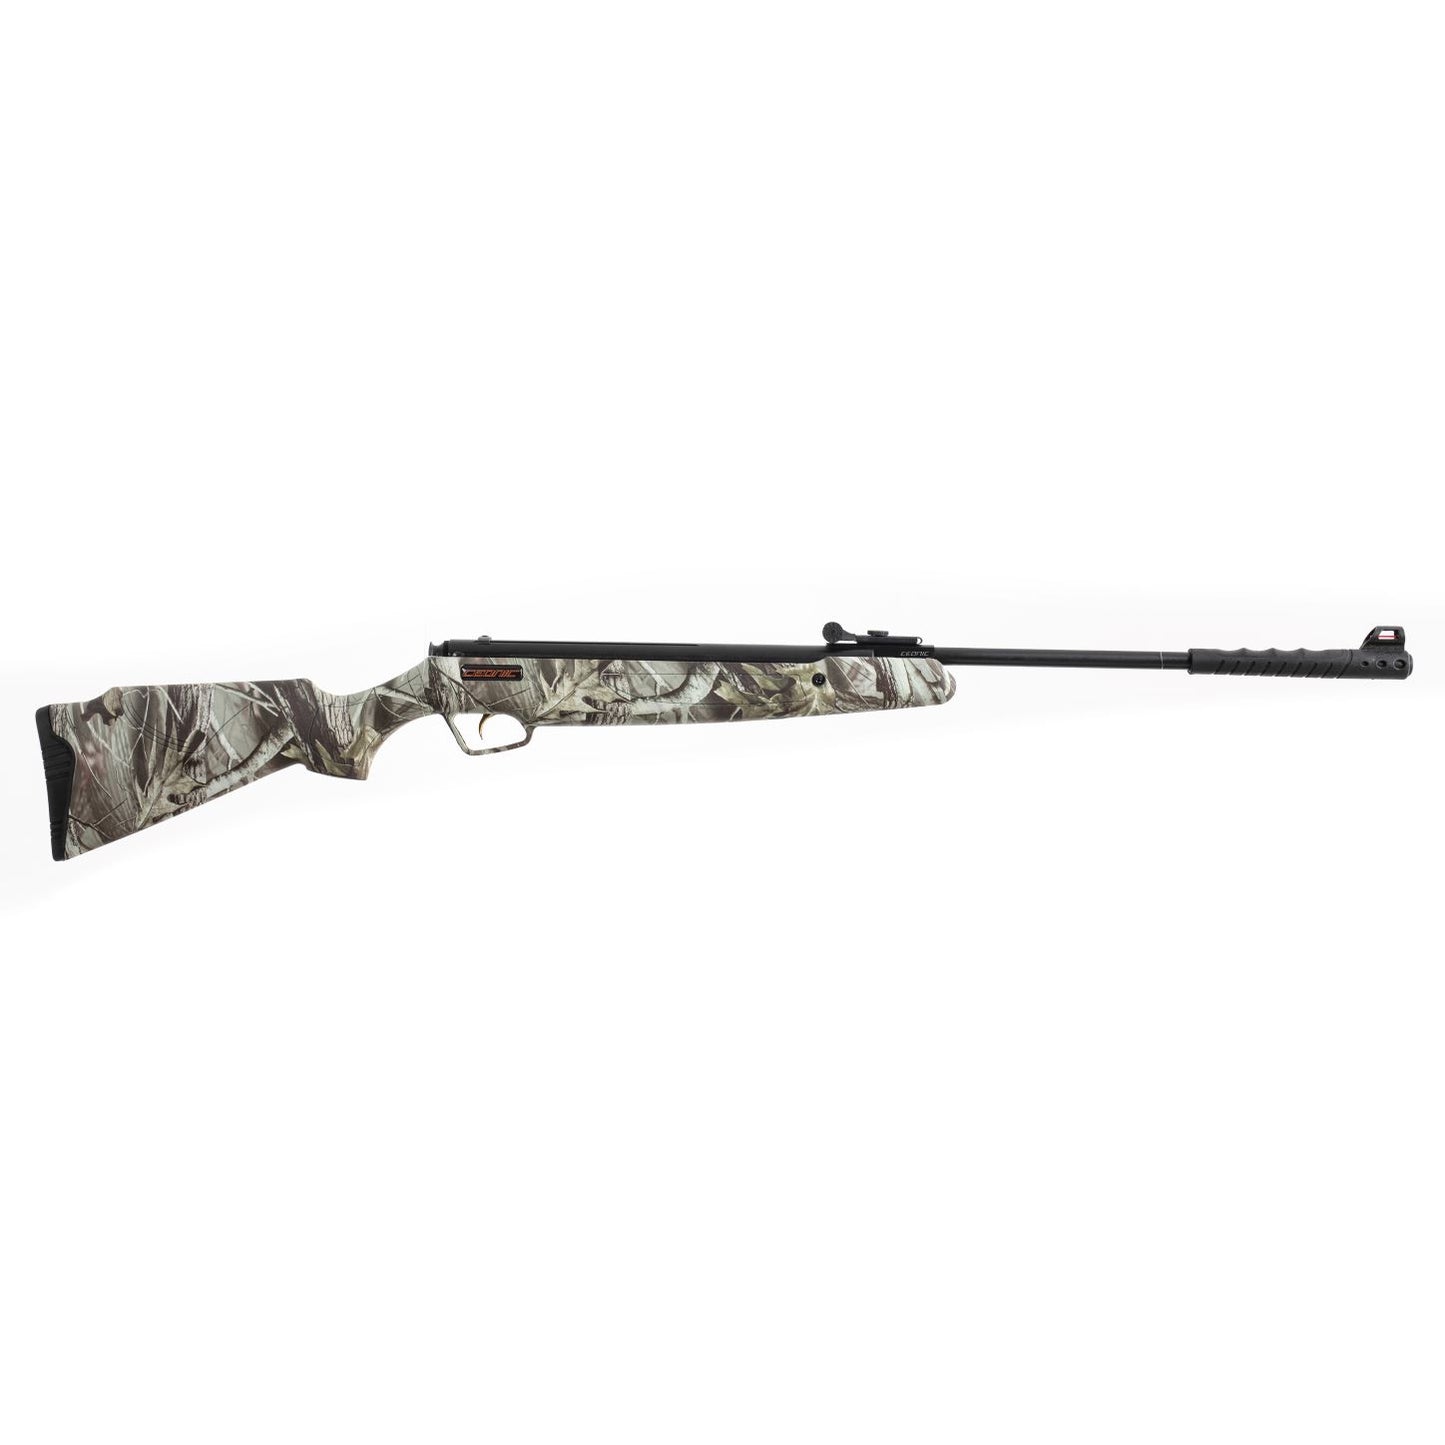 Right side view of a camo Ceonic Spring Piston Air Rifle